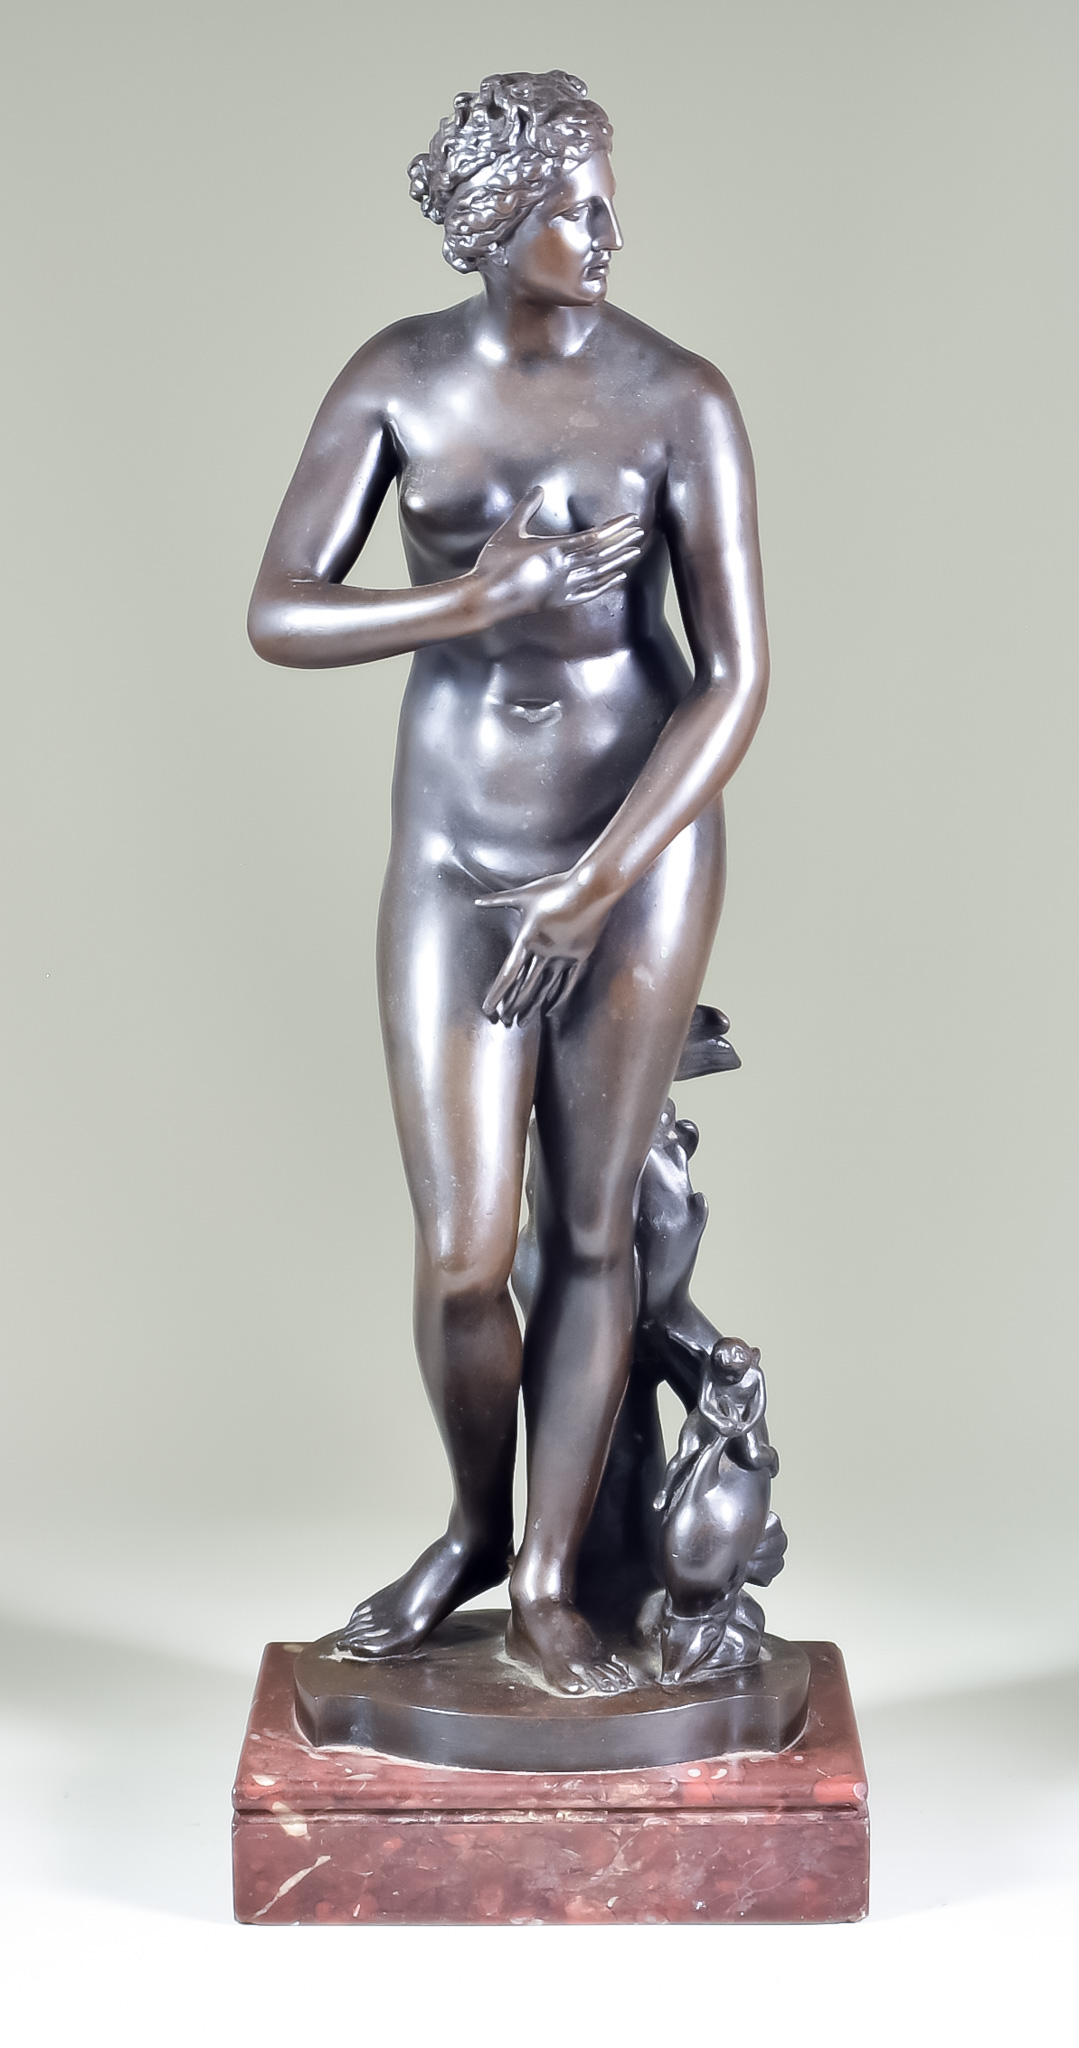 19th Century French School - Bronze Standing Figure of Venus and Cupid with a Dolphin, after the